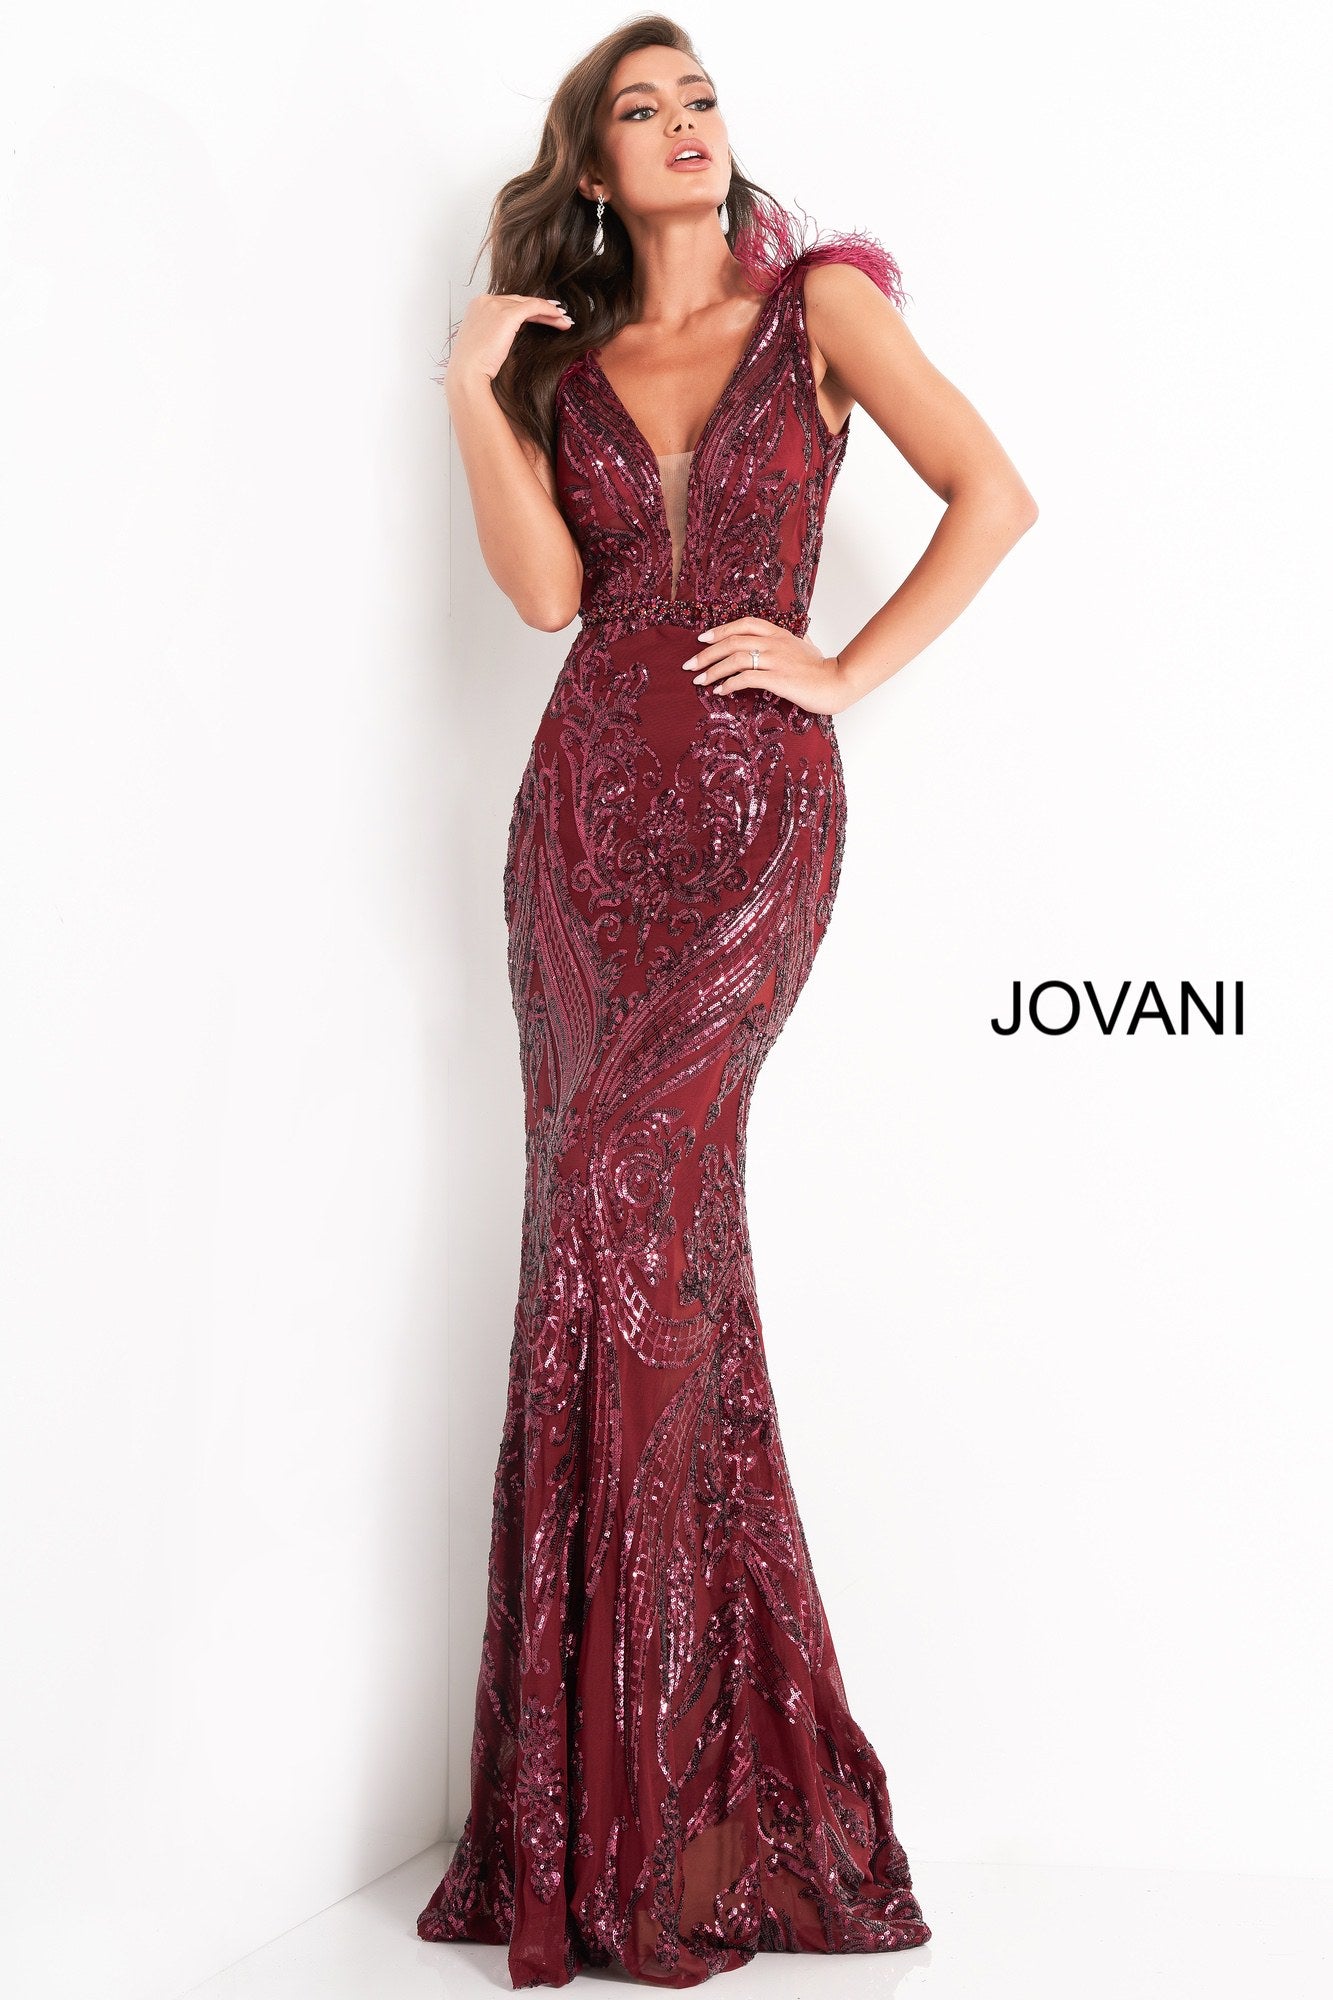 Jovani 3180 Sequin Long Prom Dress Plunging Neckline Feathers Sheer bo ...